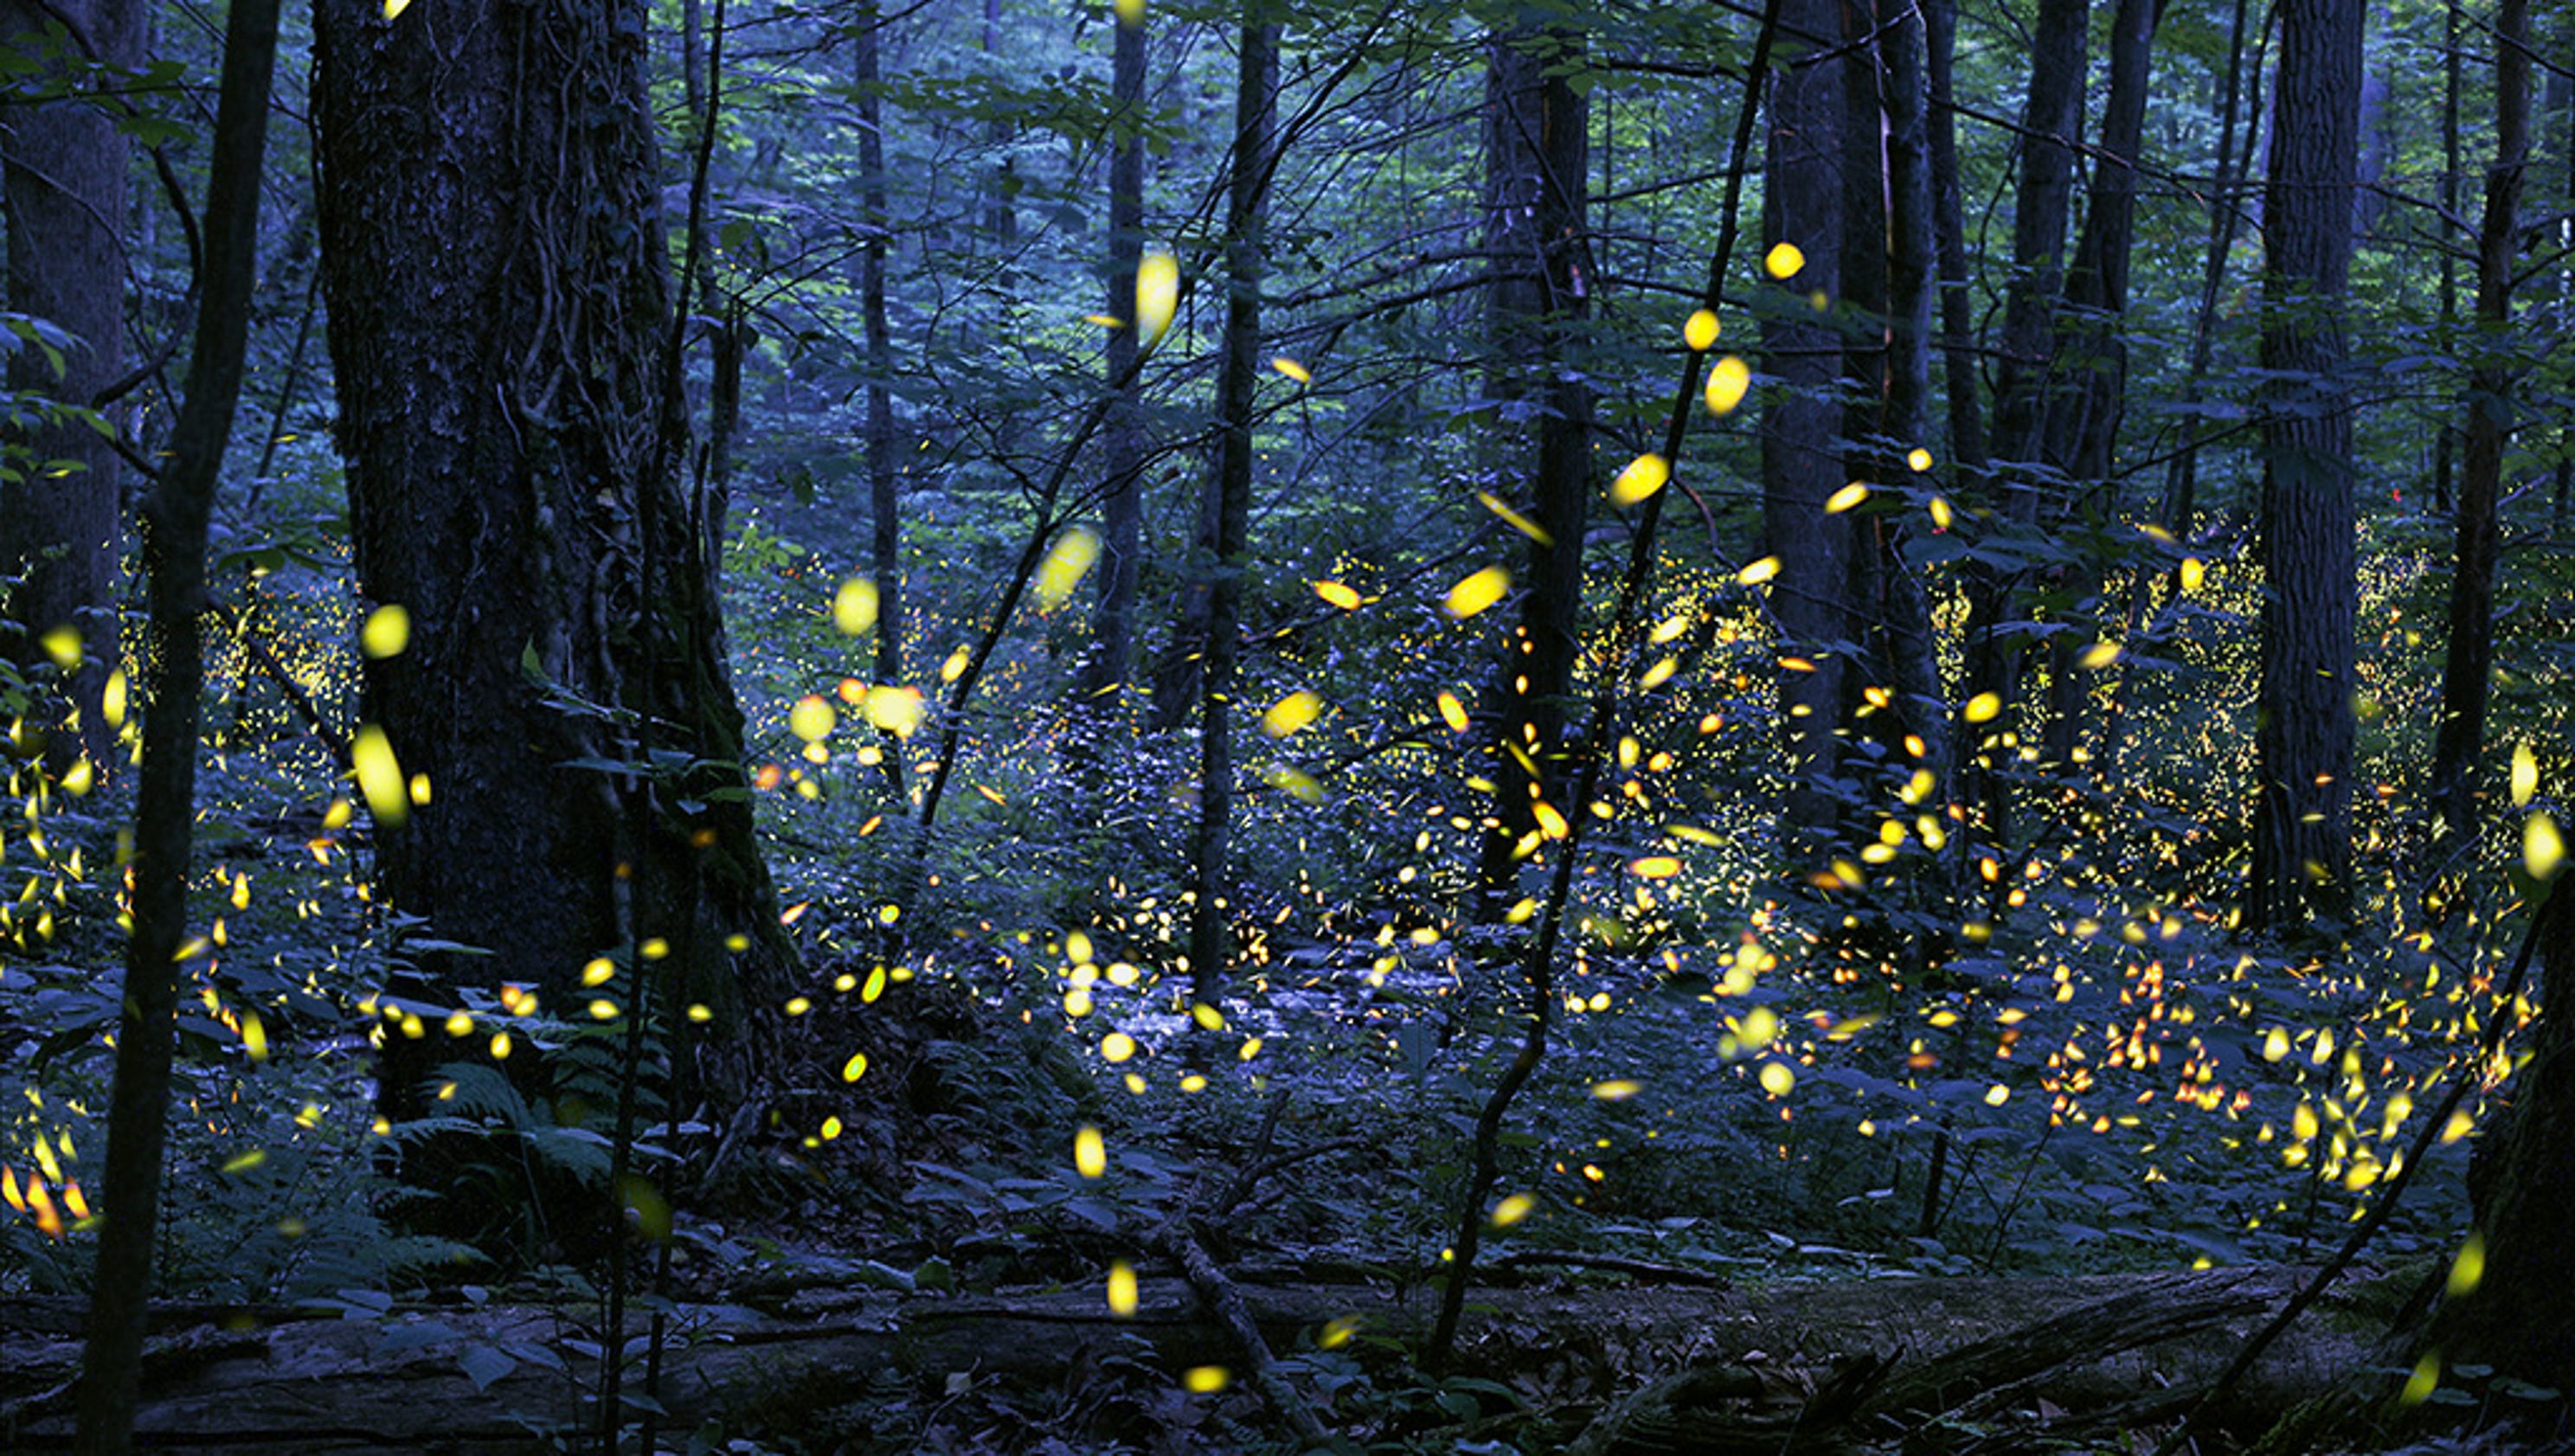 Great Smoky Mountains Park opens lottery for firefly viewing